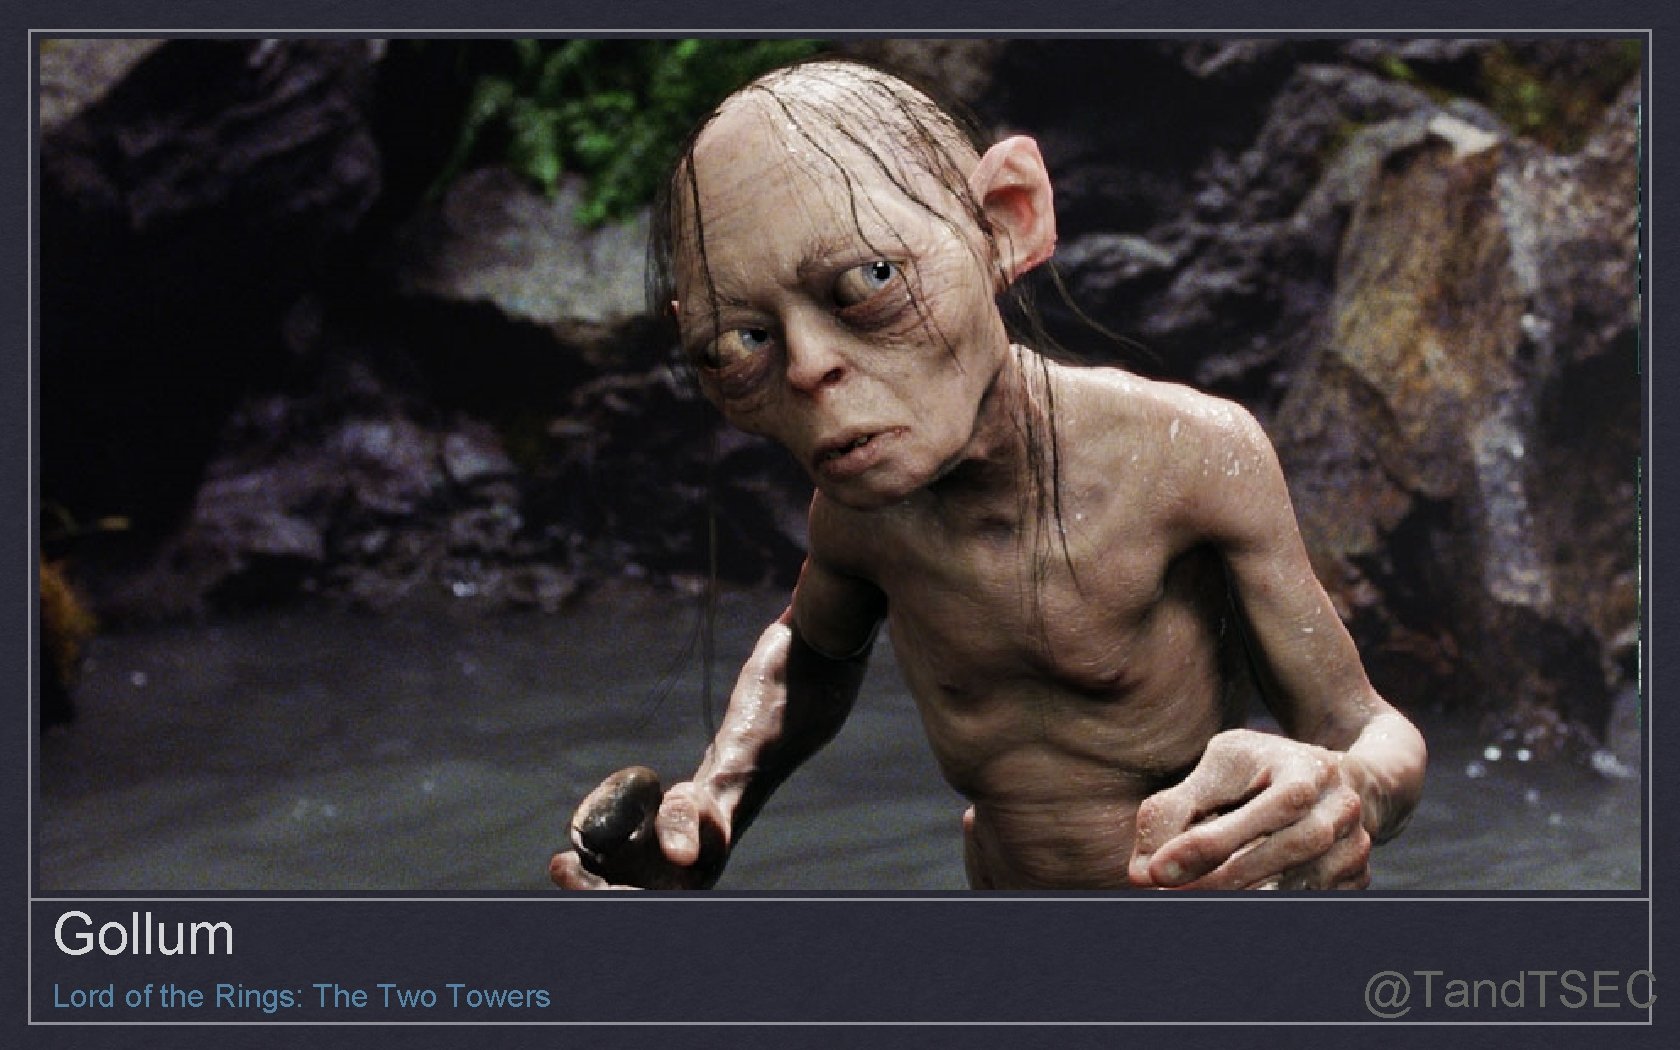 Gollum Lord of the Rings: The Two Towers @Tand. TSEC 